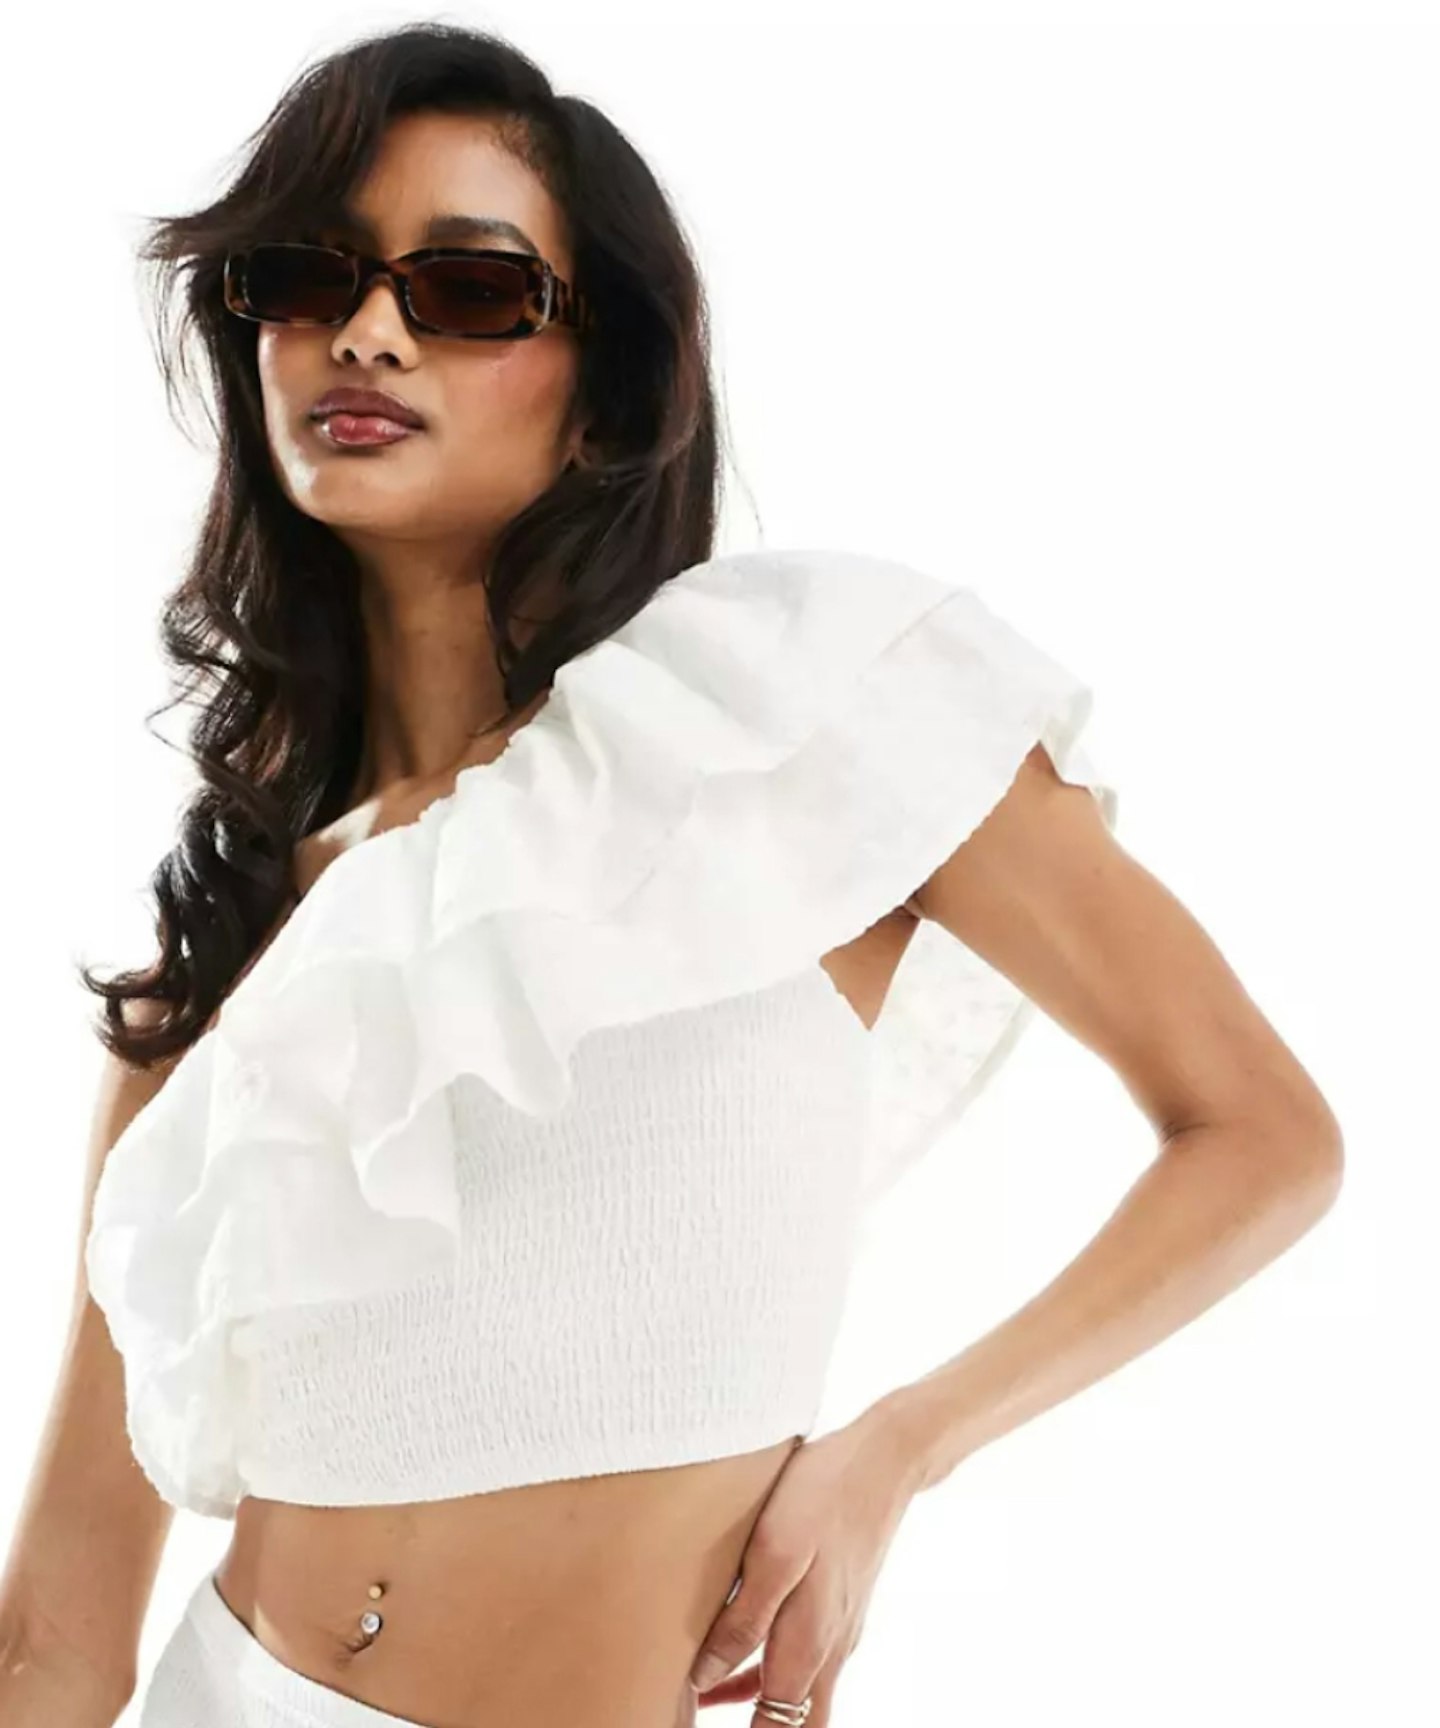 Abercrombie & Fitch Co-ord One Shoulder Ruffle Top in White